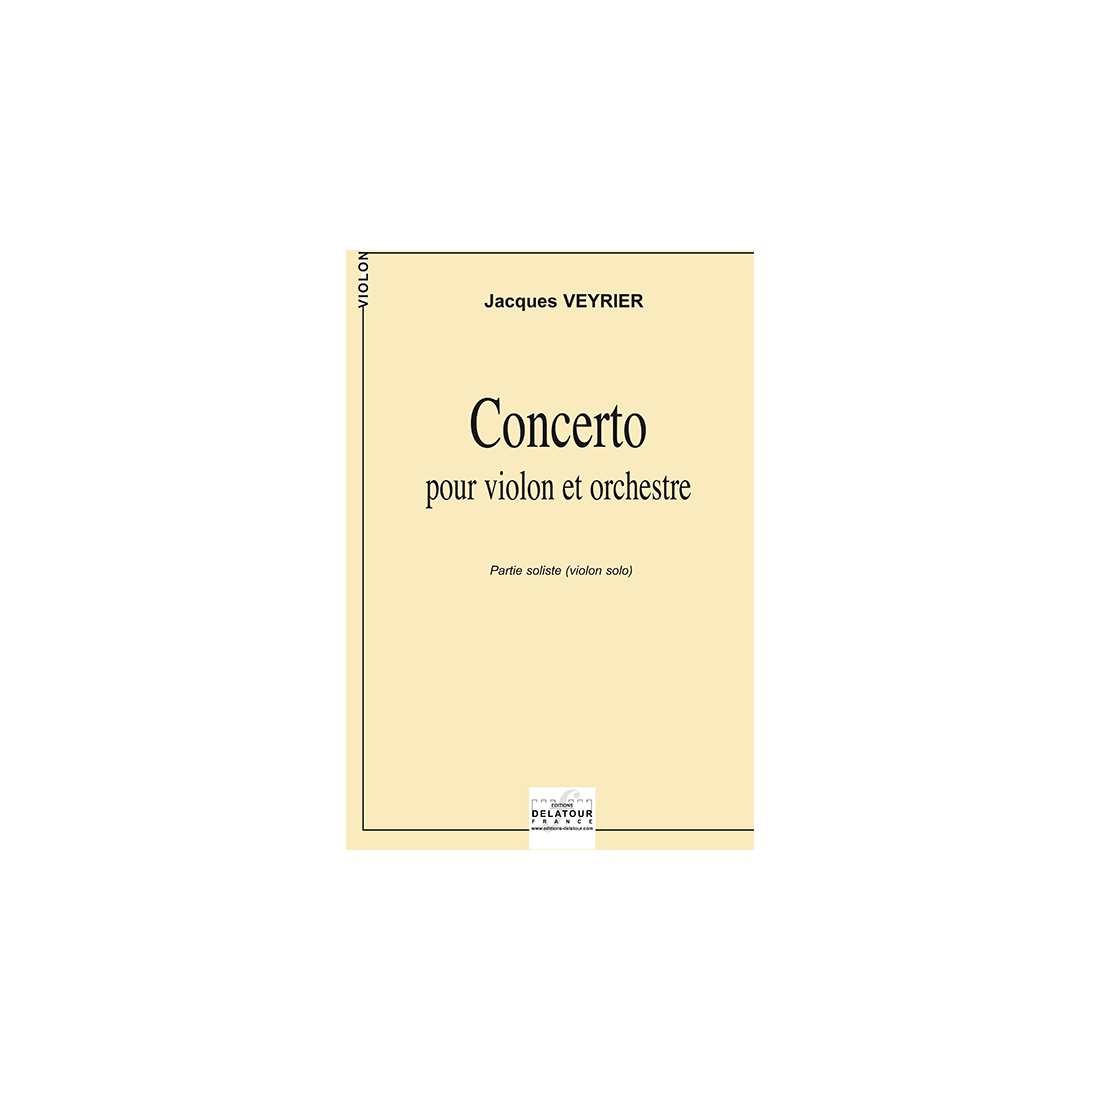 Concerto for violin and orchestra (SOLOIST)